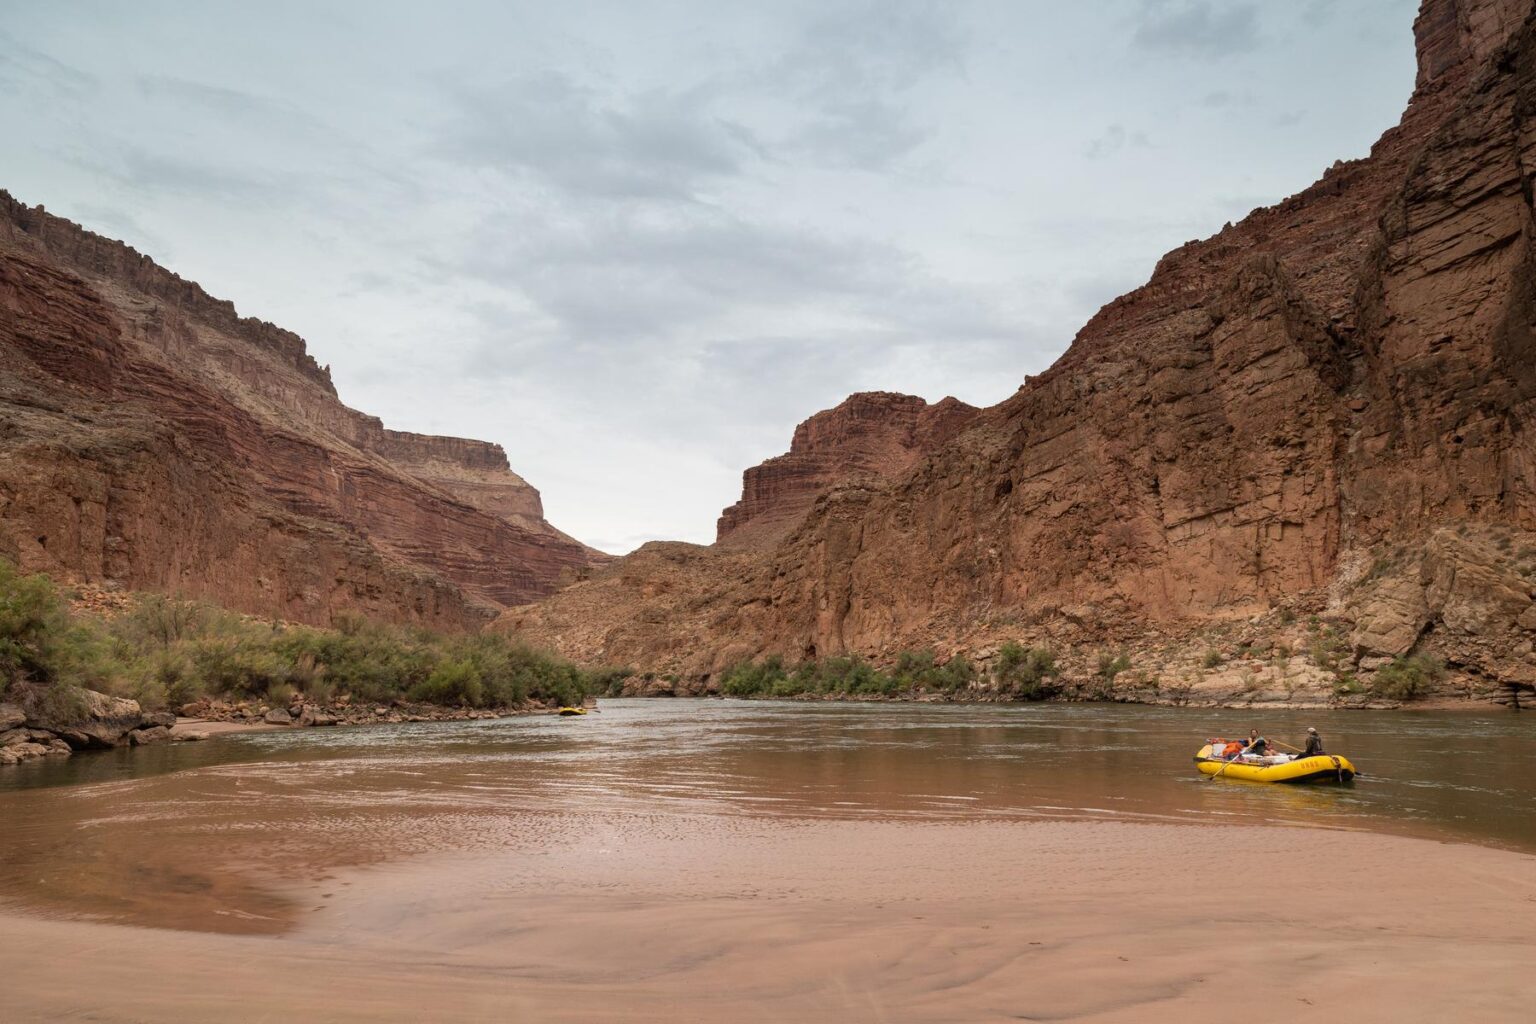 A river guide navigates low flows on the Colorado River on a Grand Canyon rafting trip